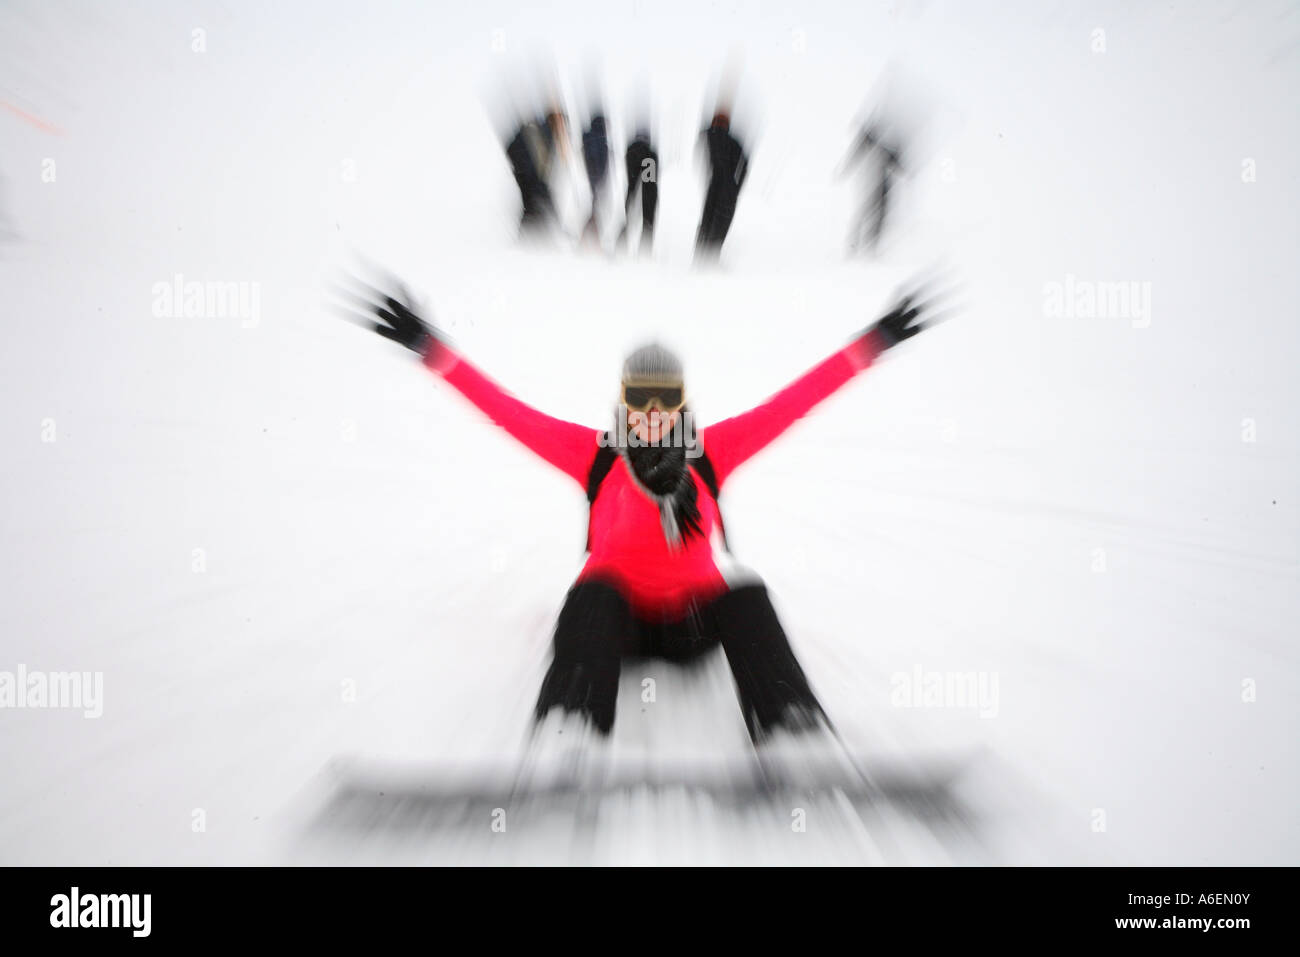 Snowboarder in action during winter sports in the French Alps Tarentaise Savoy Savoie Peisey Les Arcs La Plagne France Stock Photo